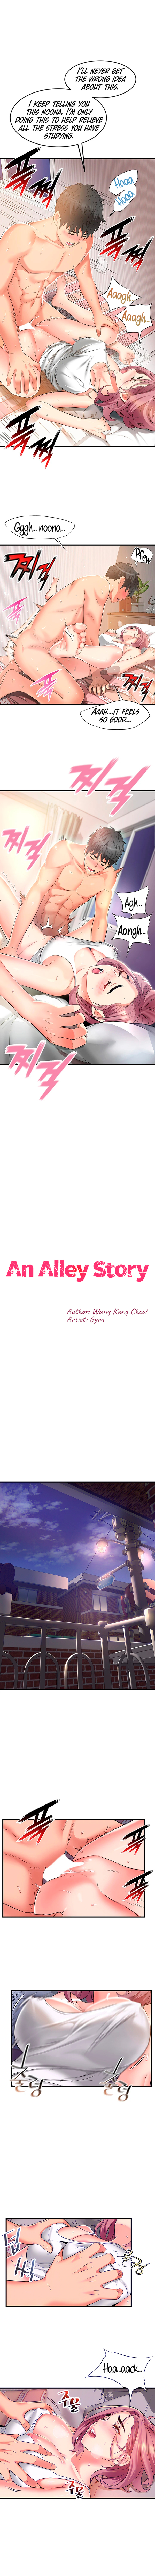 An Alley story image